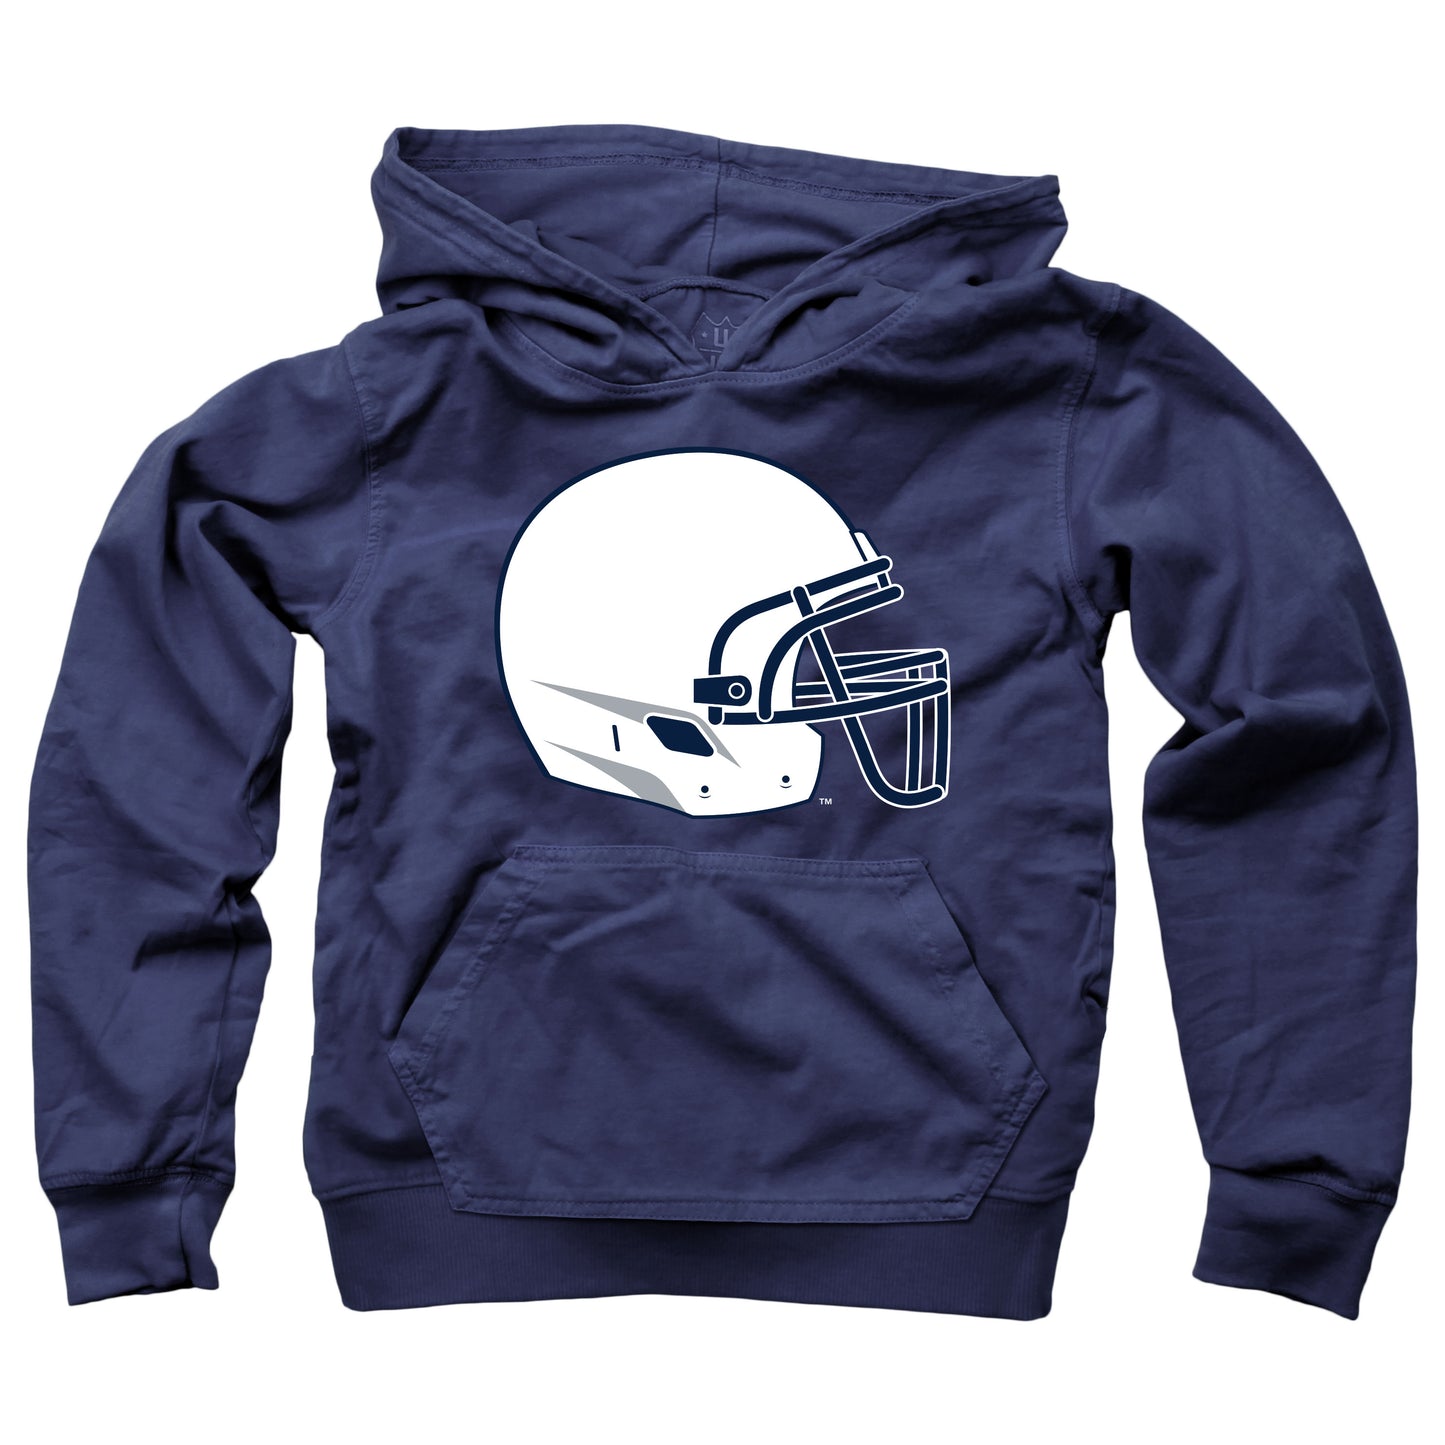 Penn State Nittany Lions Wes and Willy Youth Boys Helmet Logo Pullover Hoodie